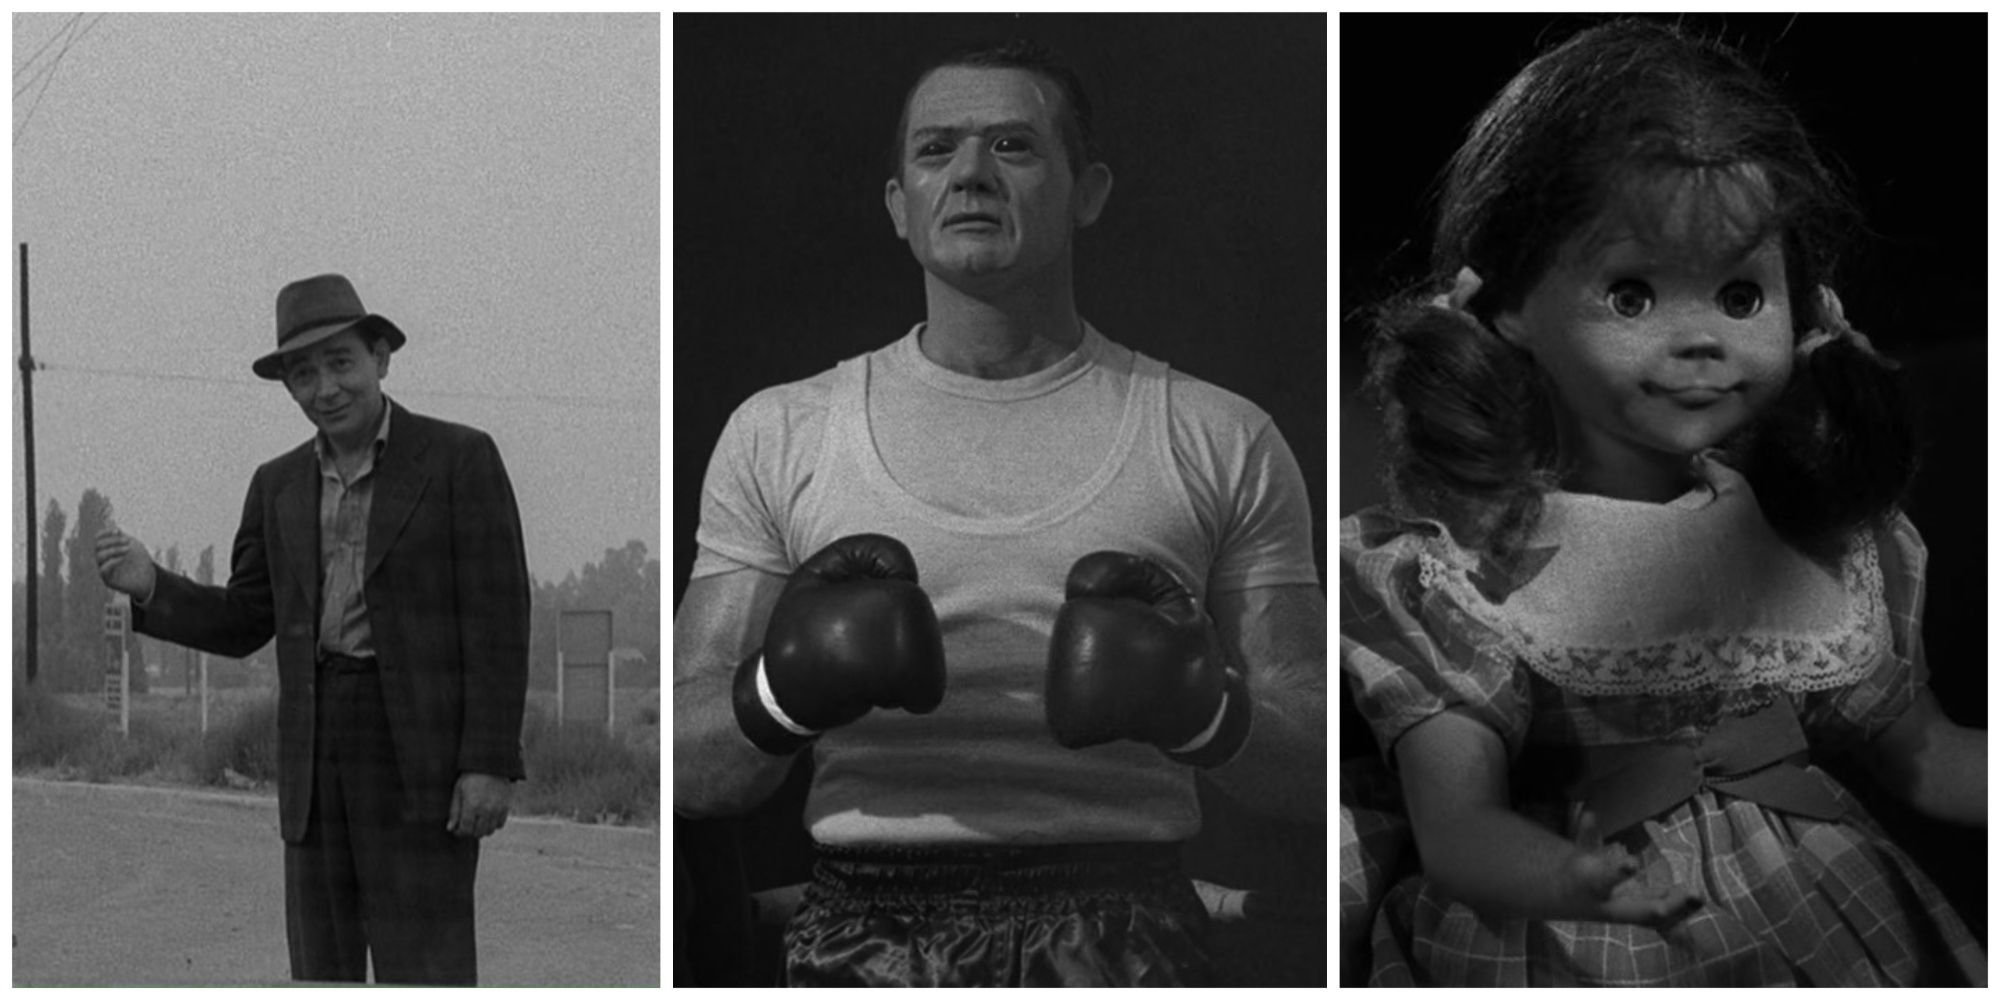 Split image showing scenes from three Twilight Zone episodes (The Hitch-Hiker, Steel, and Living Doll).